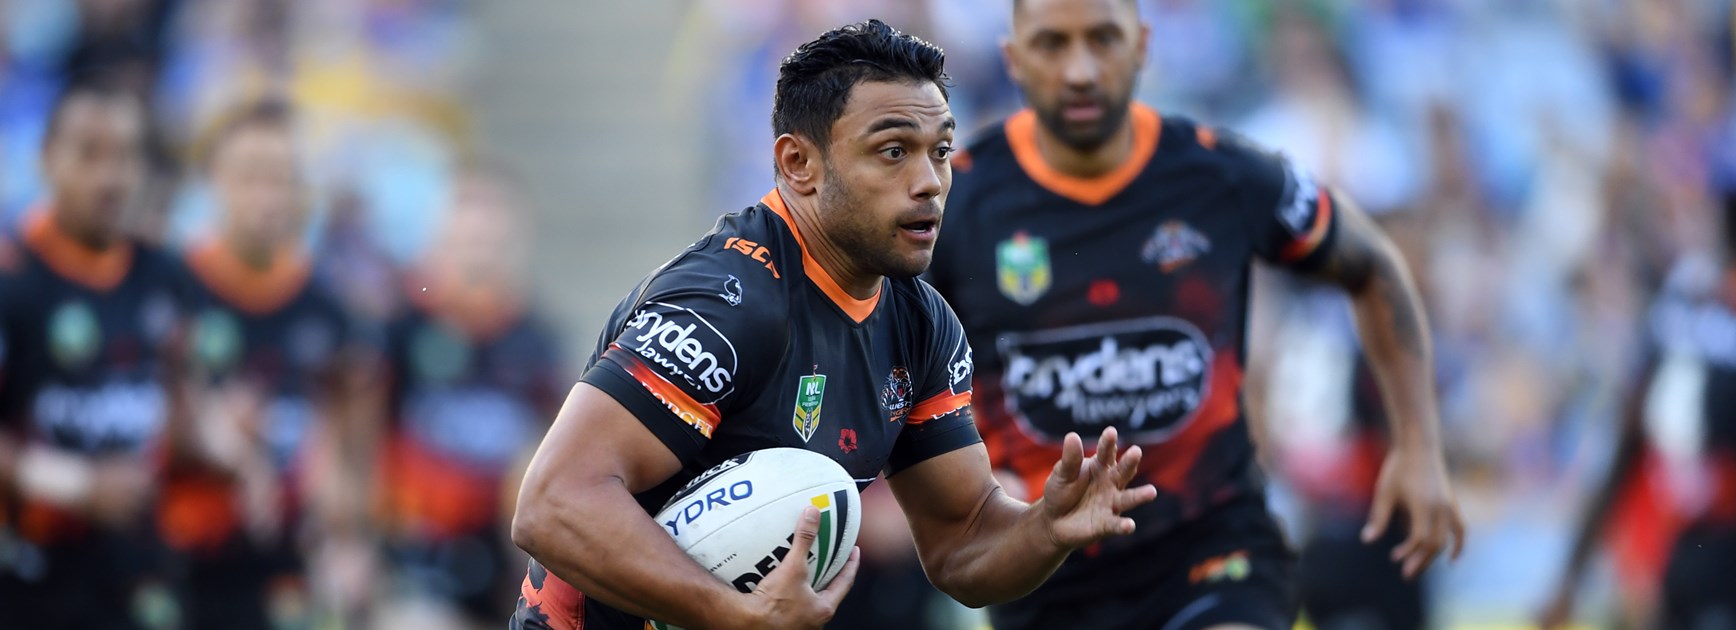 Wests Tigers Results: Round 8